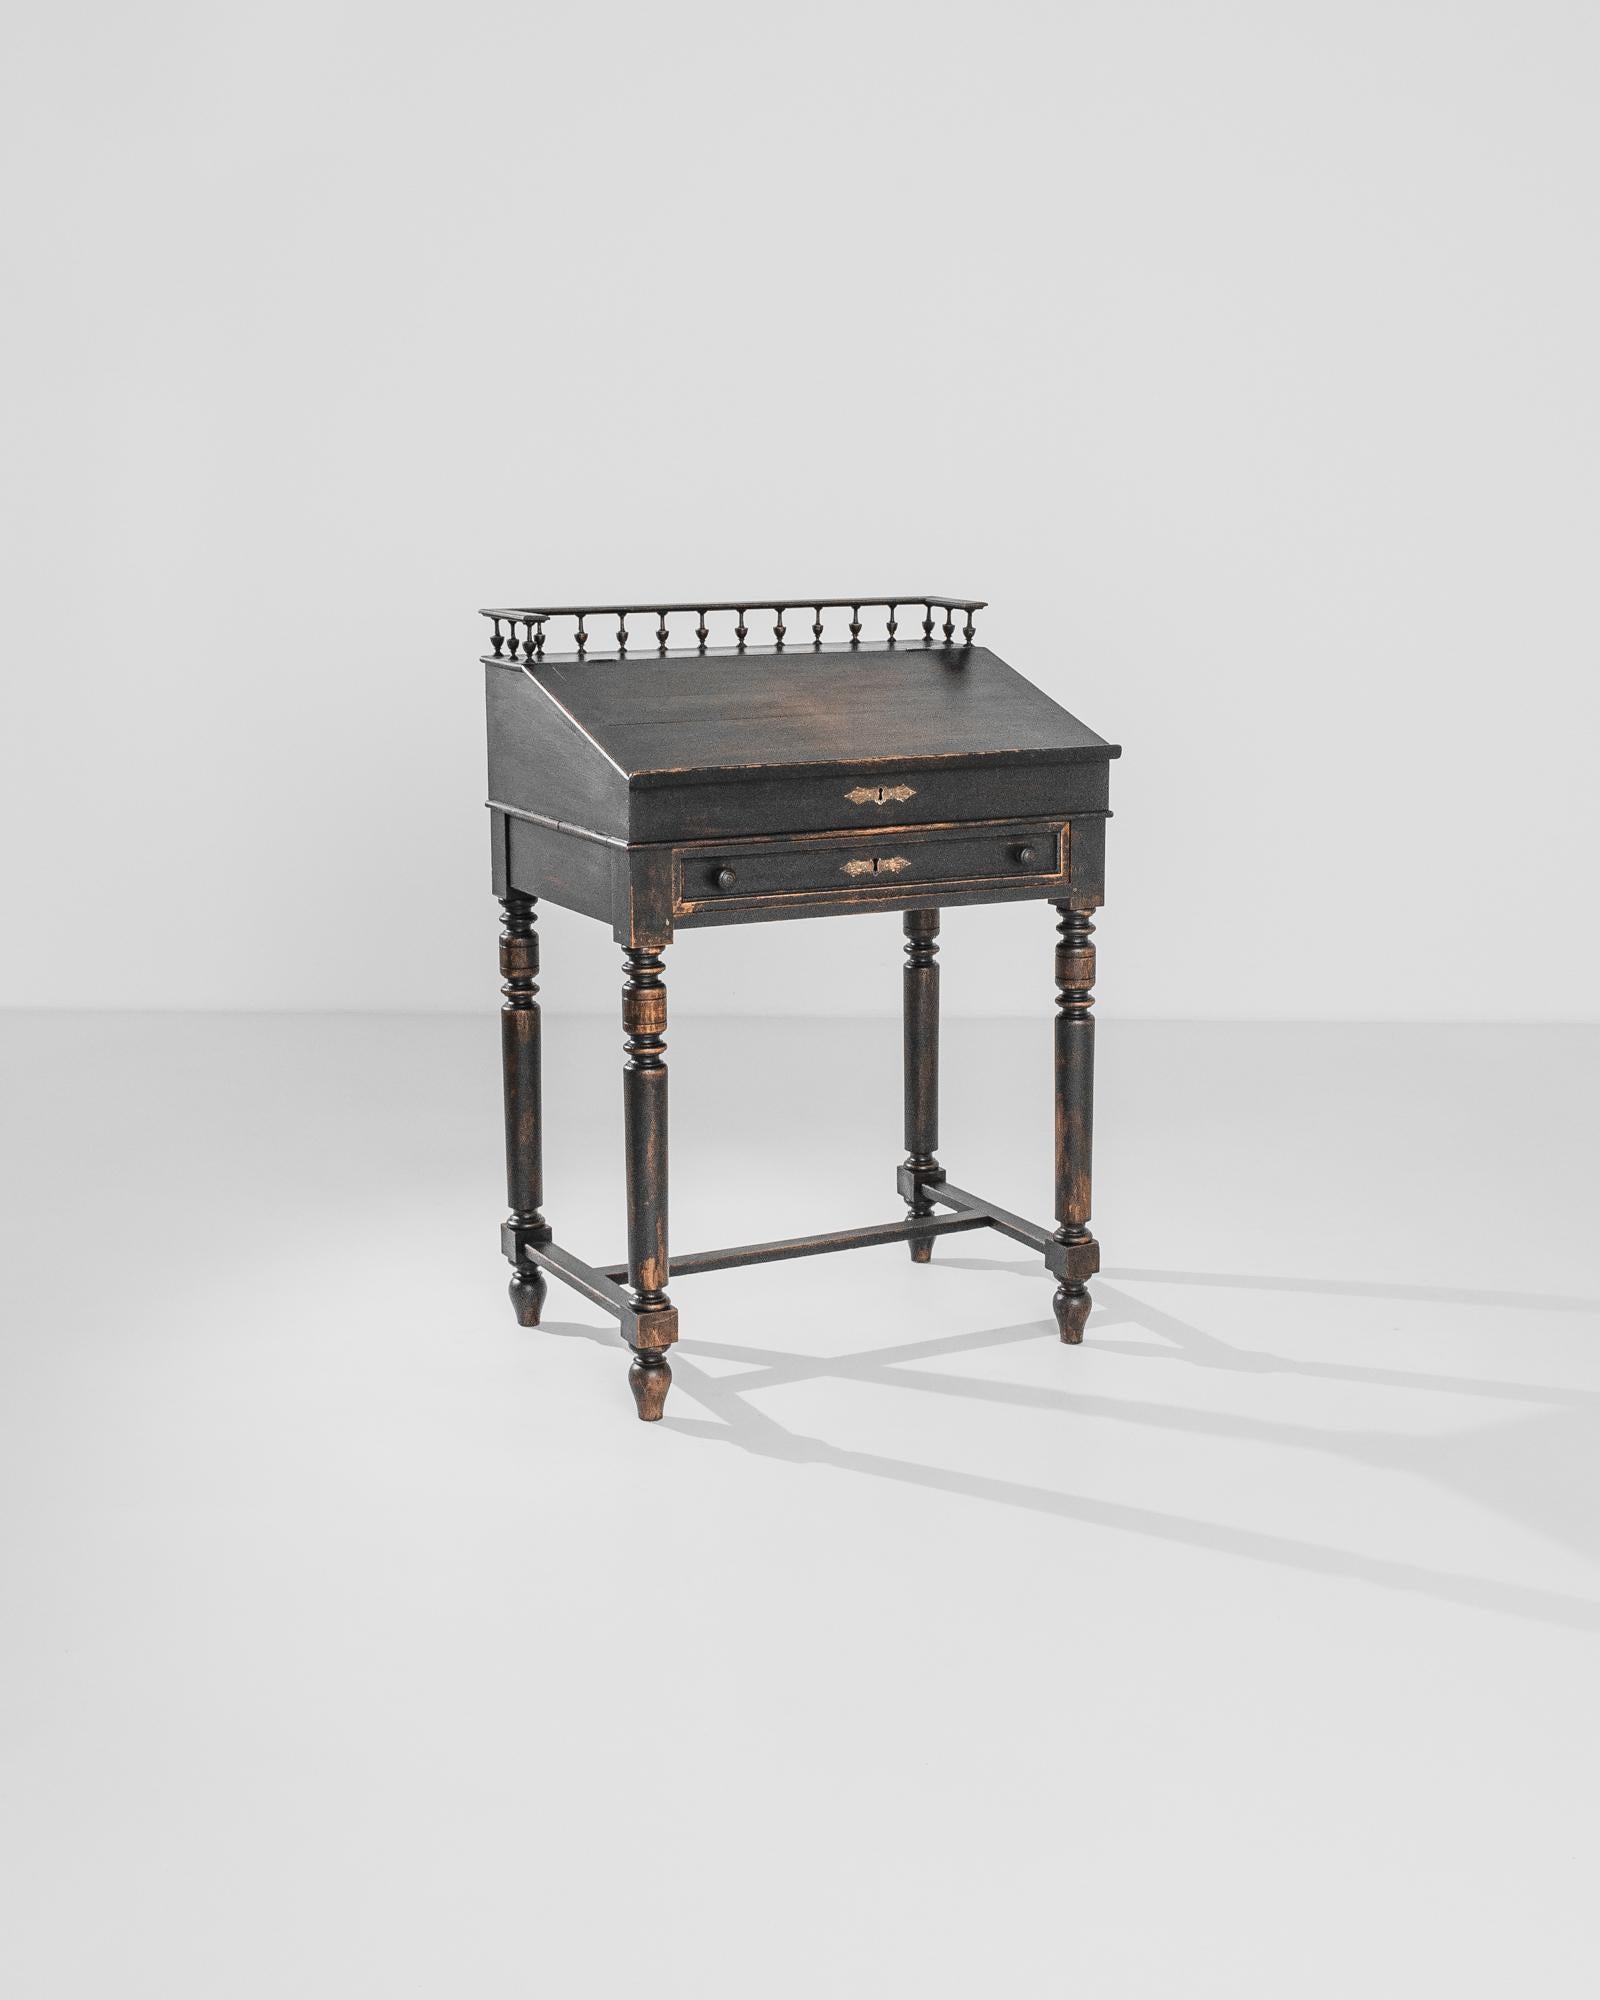 A petite black writing table made in France circa 1890. Like a majestic concert piano, this deluxe black desk has a hinged top that reveals two secret drawers with intriguing handwritten notes on them. The external drawer is decorated with iron